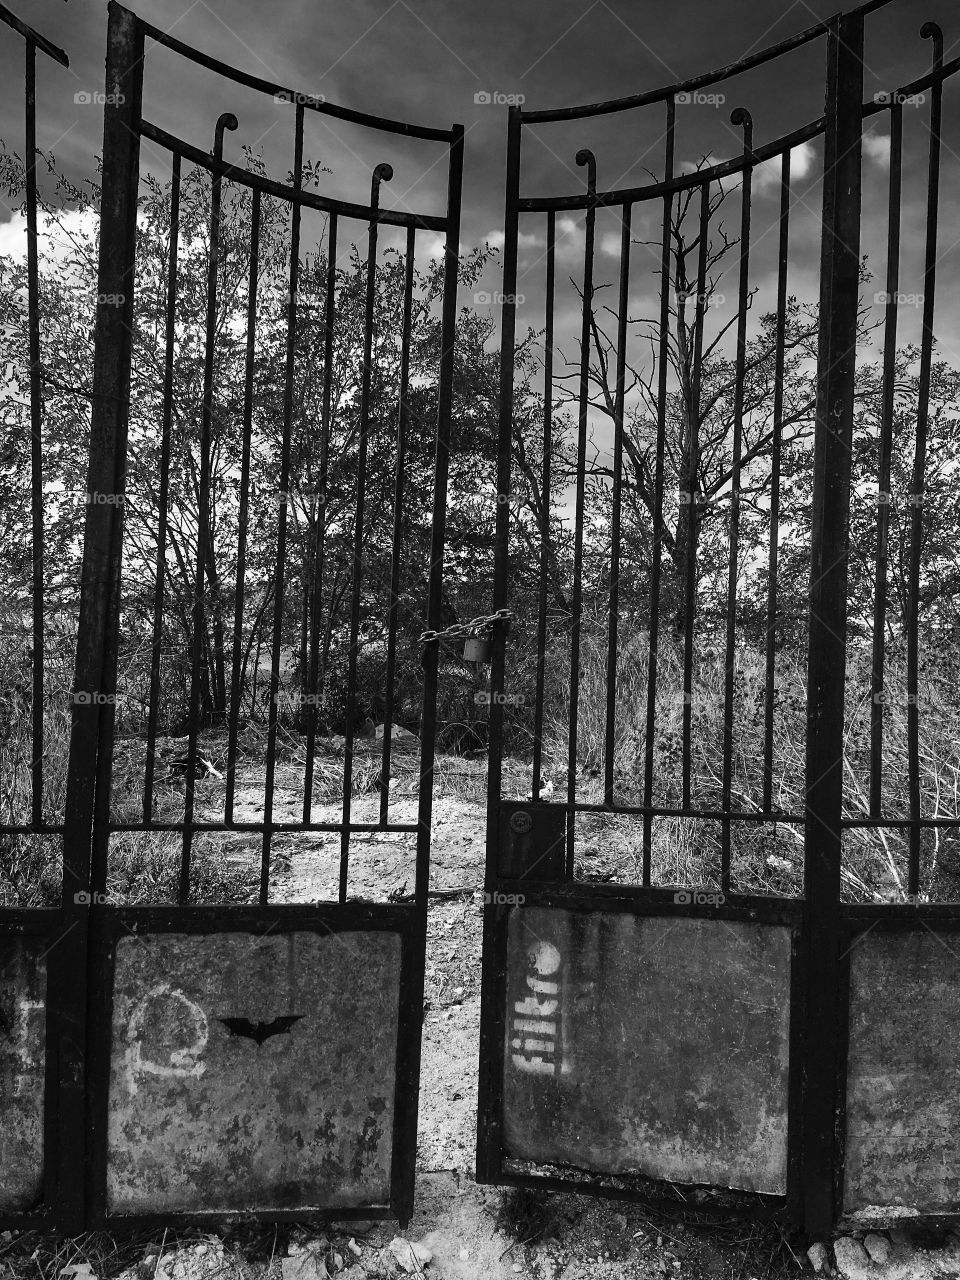 The black and white gate to somewhere 